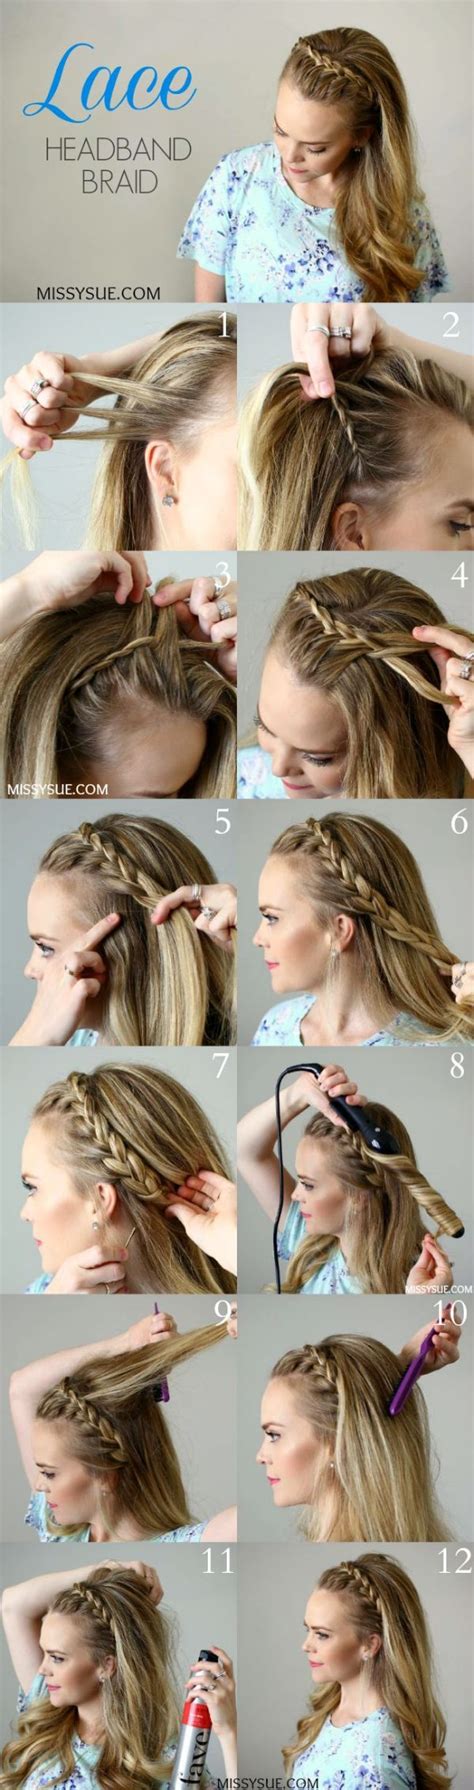 The Prettiest Braided Hairstyles For Long Hair With Tutorials For